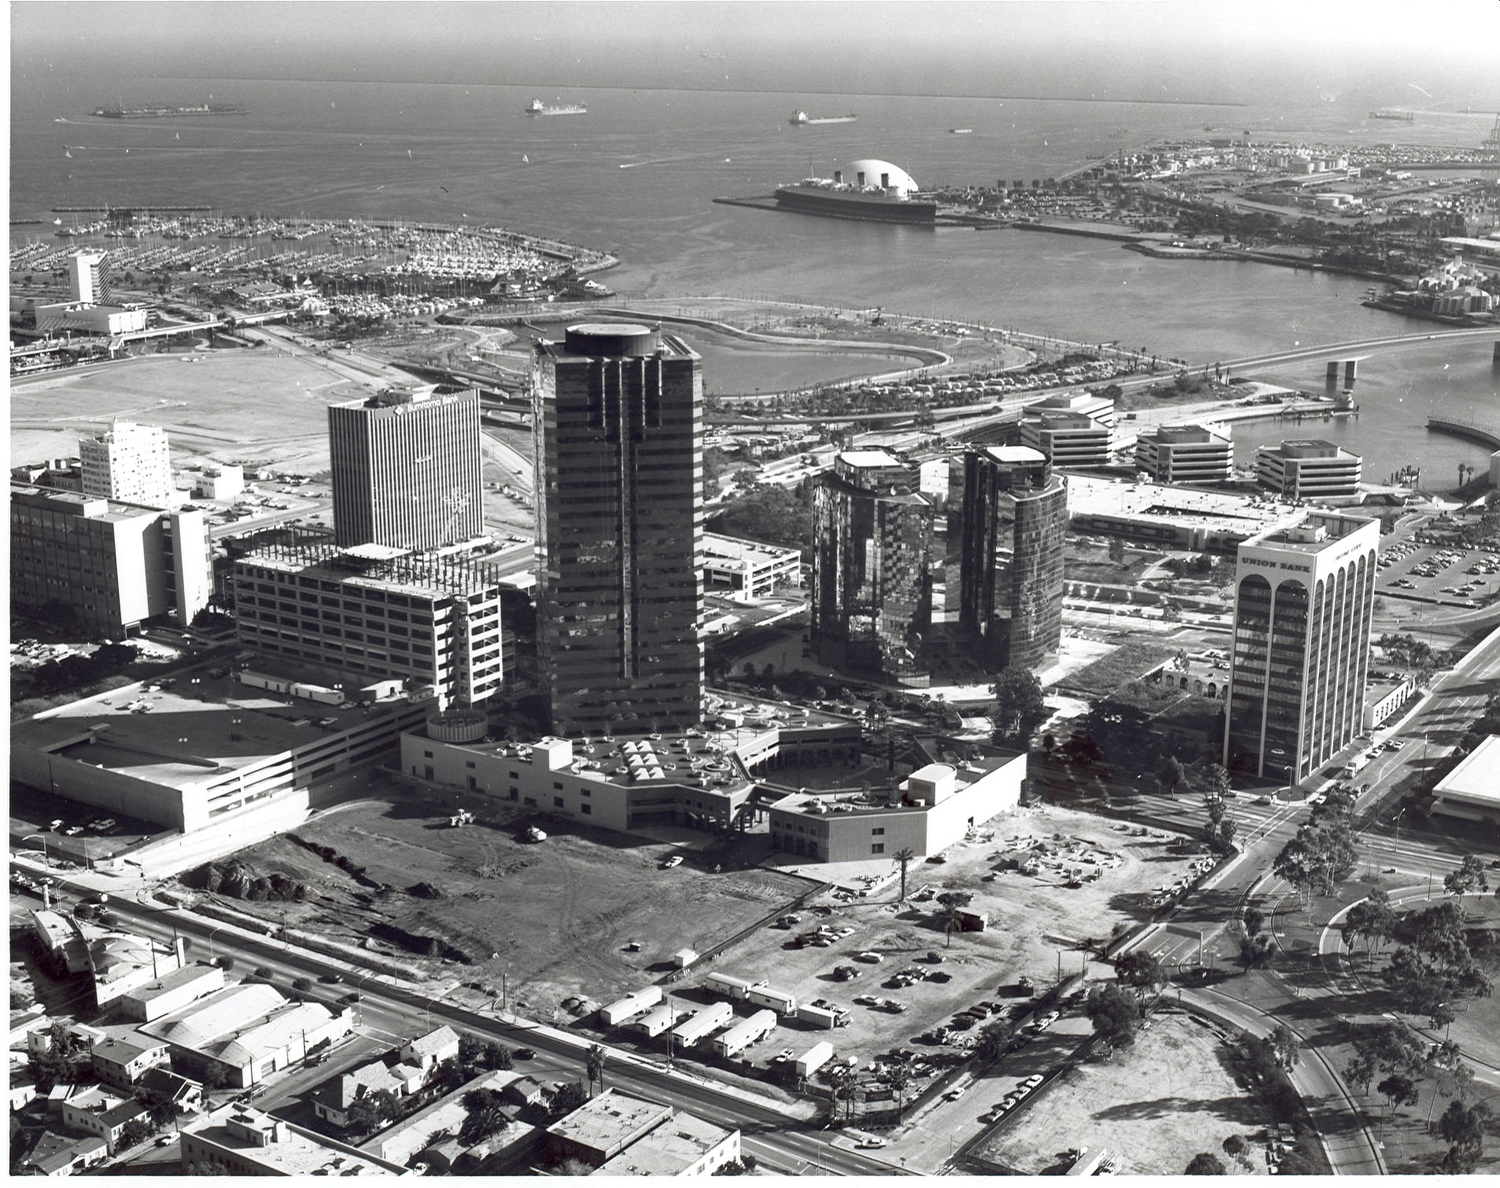 The completed World Trade Center takes its place in the Long Beach skyline in 1989.